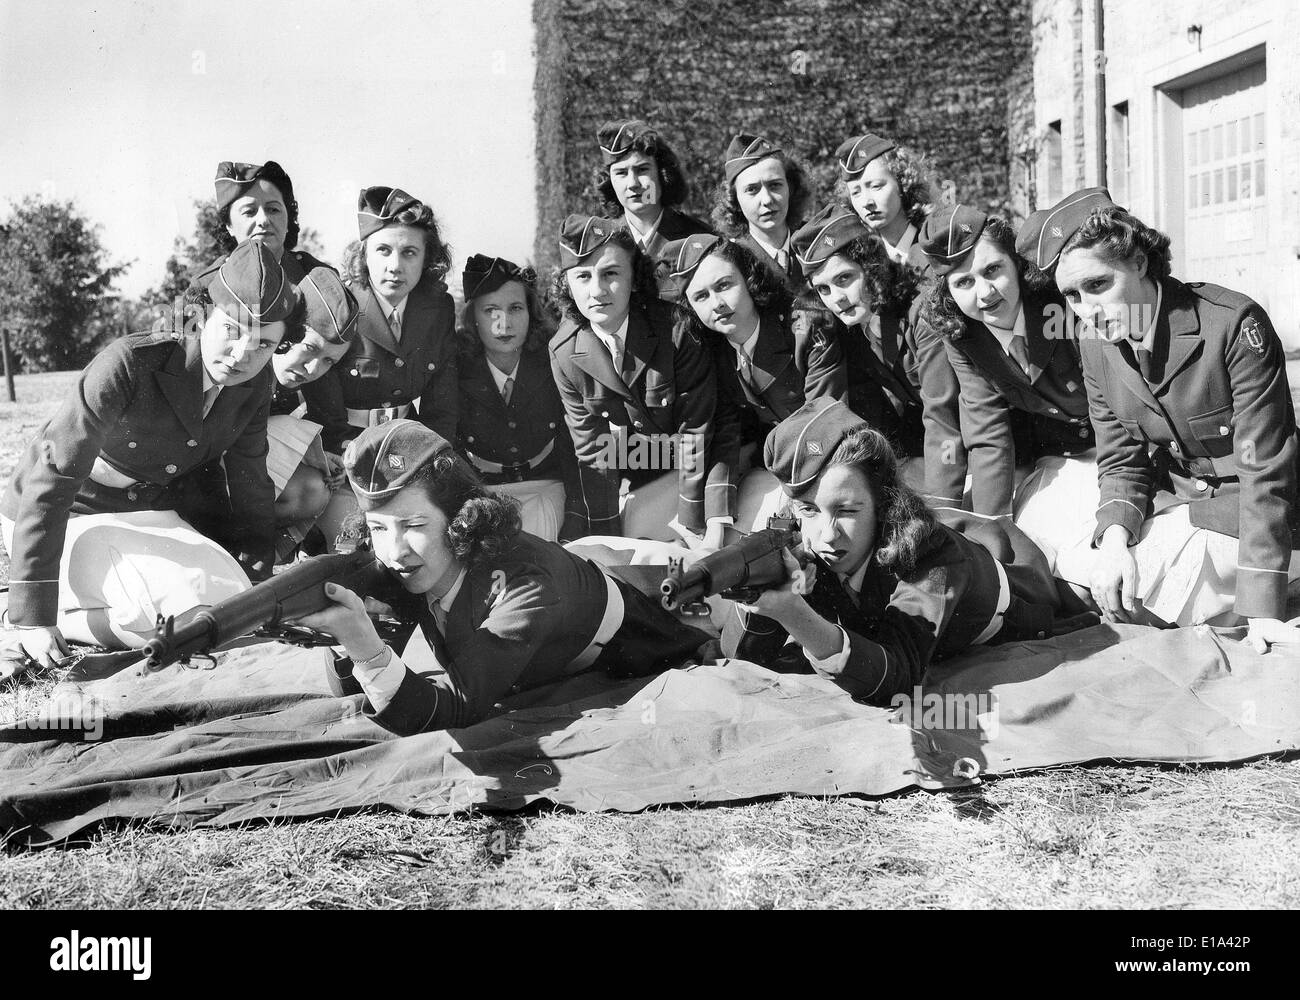 College girls get military training during ww2 Stock Photo